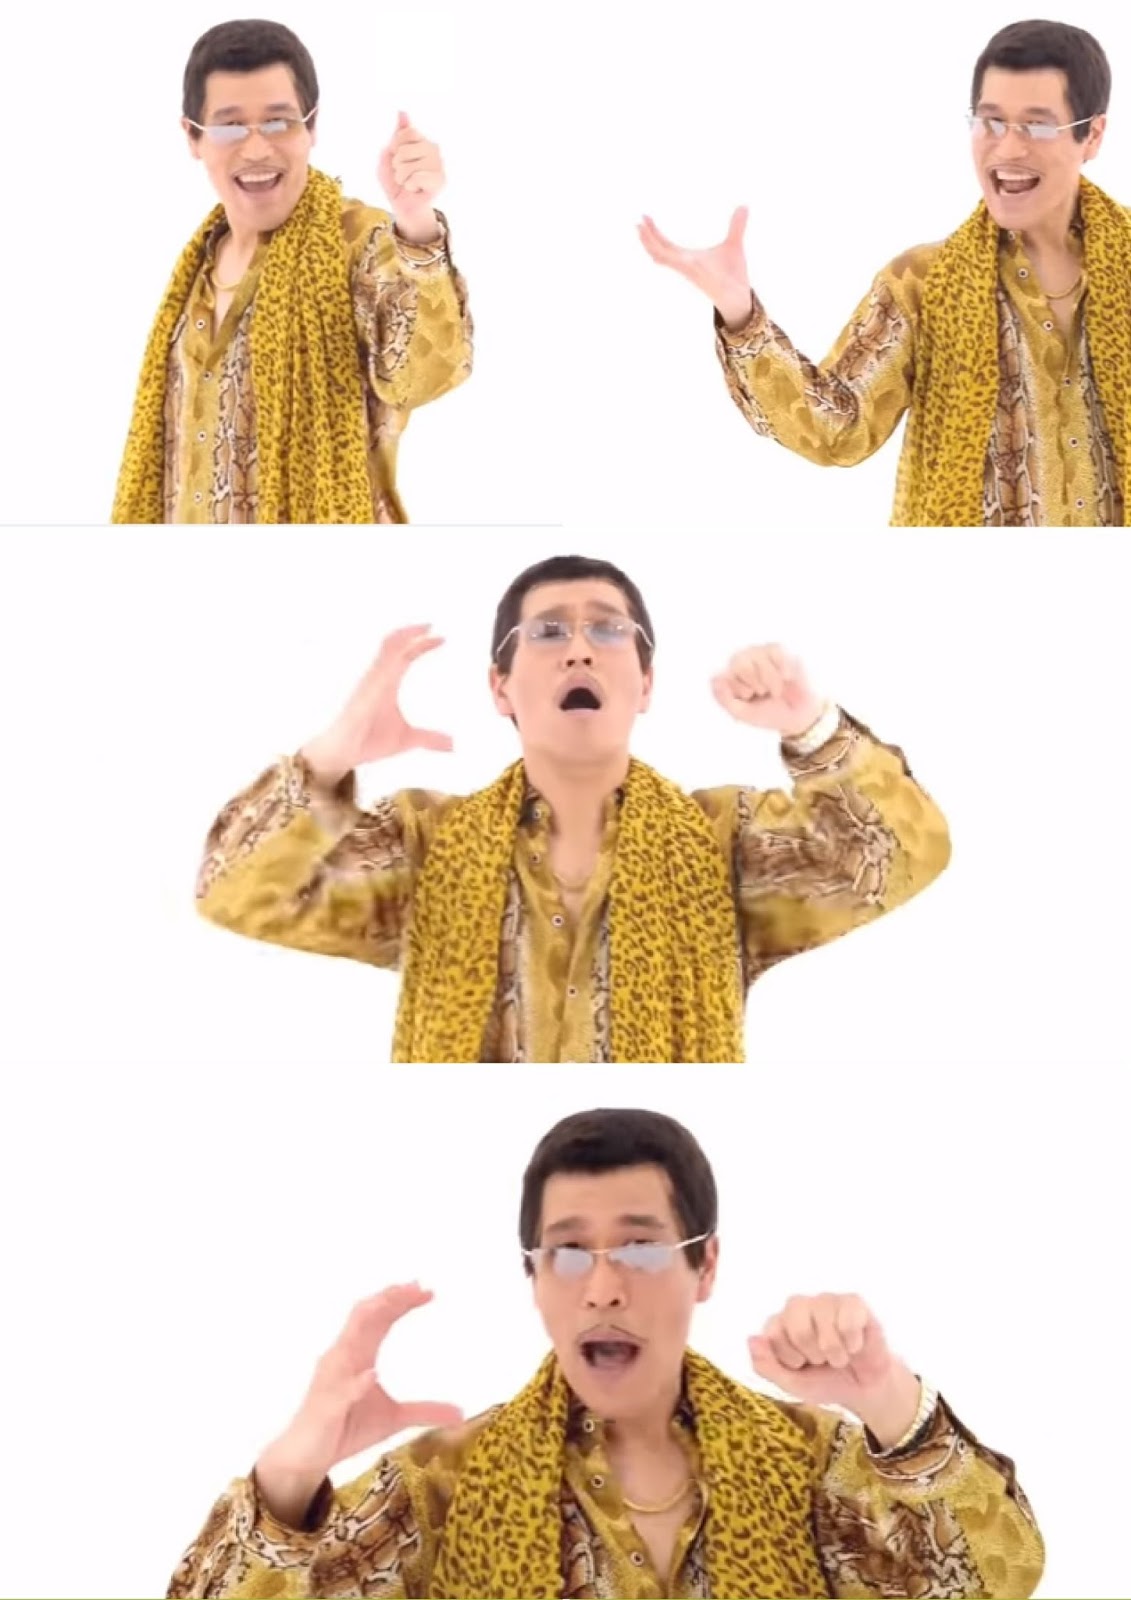 What Are You Looking For Video PPAP Dan Meme PPAP Lucu PPAP Polosan